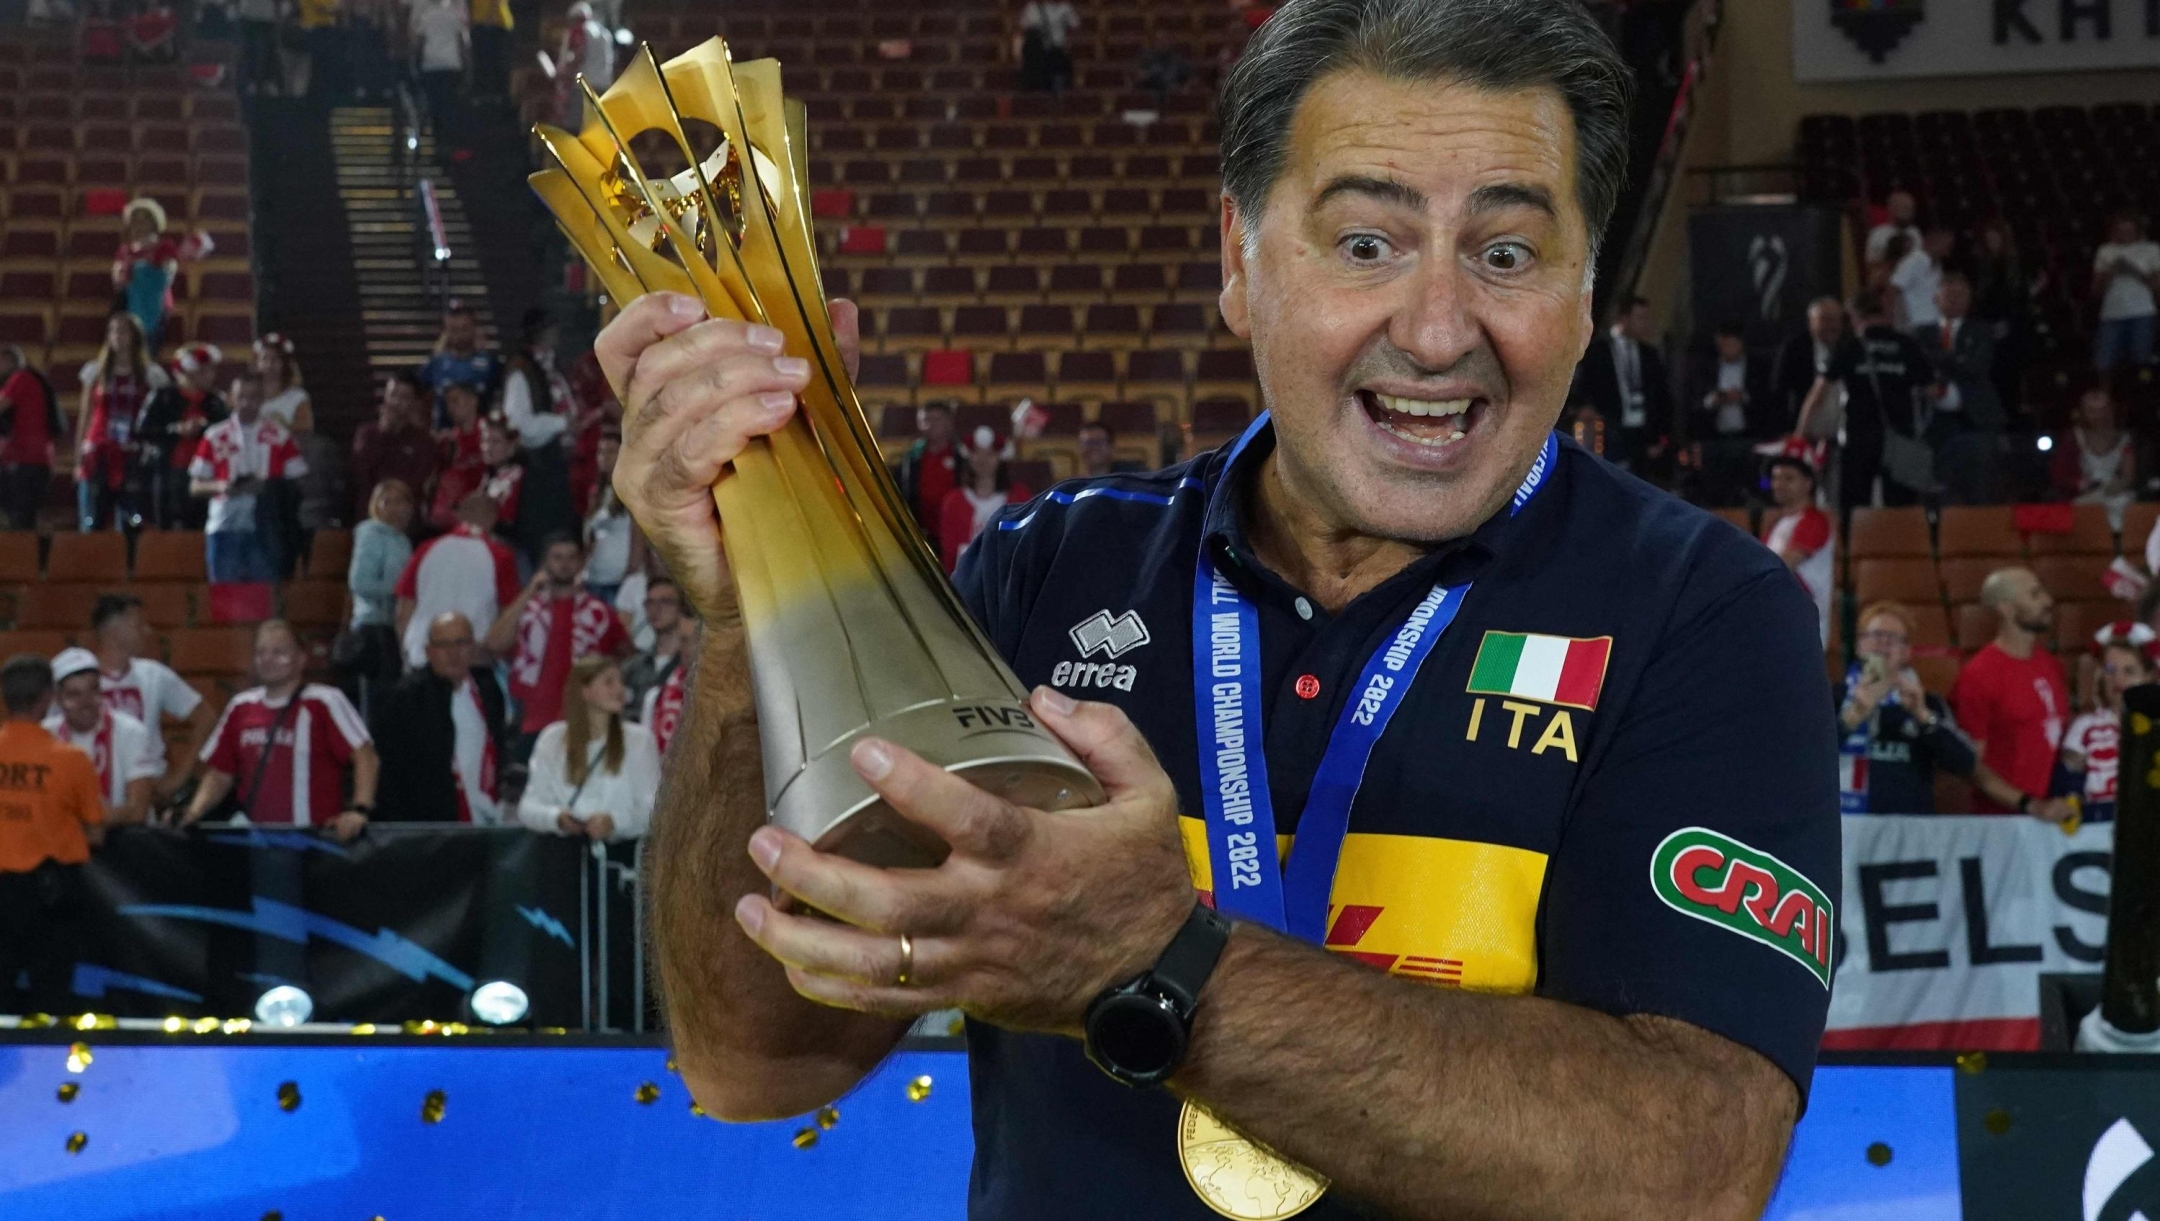 Italy's coach Ferdinando de Giorgi celebrates with the trophy after winning the Men's Volleyball World Championship final match between Poland and Italy in Katowice, Poland on September 11, 2022. (Photo by JANEK SKARZYNSKI / AFP)